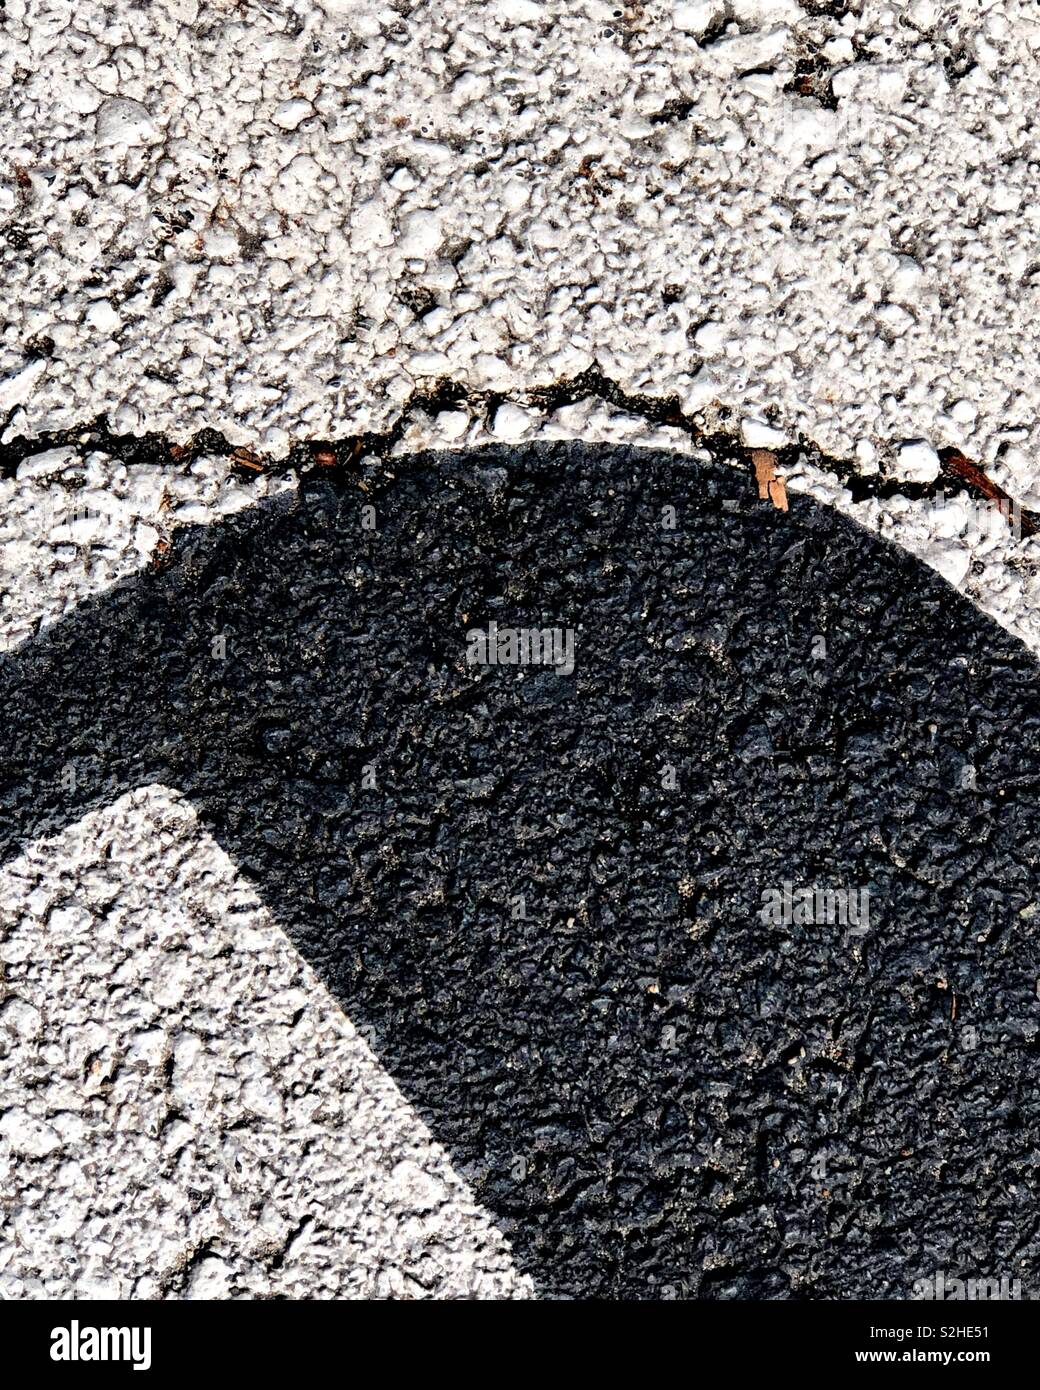 Close up asphalt-level parking directions create an urban abstraction. It’s a minimal take on urban decay and the city fighting a losing battle against it. Stock Photo